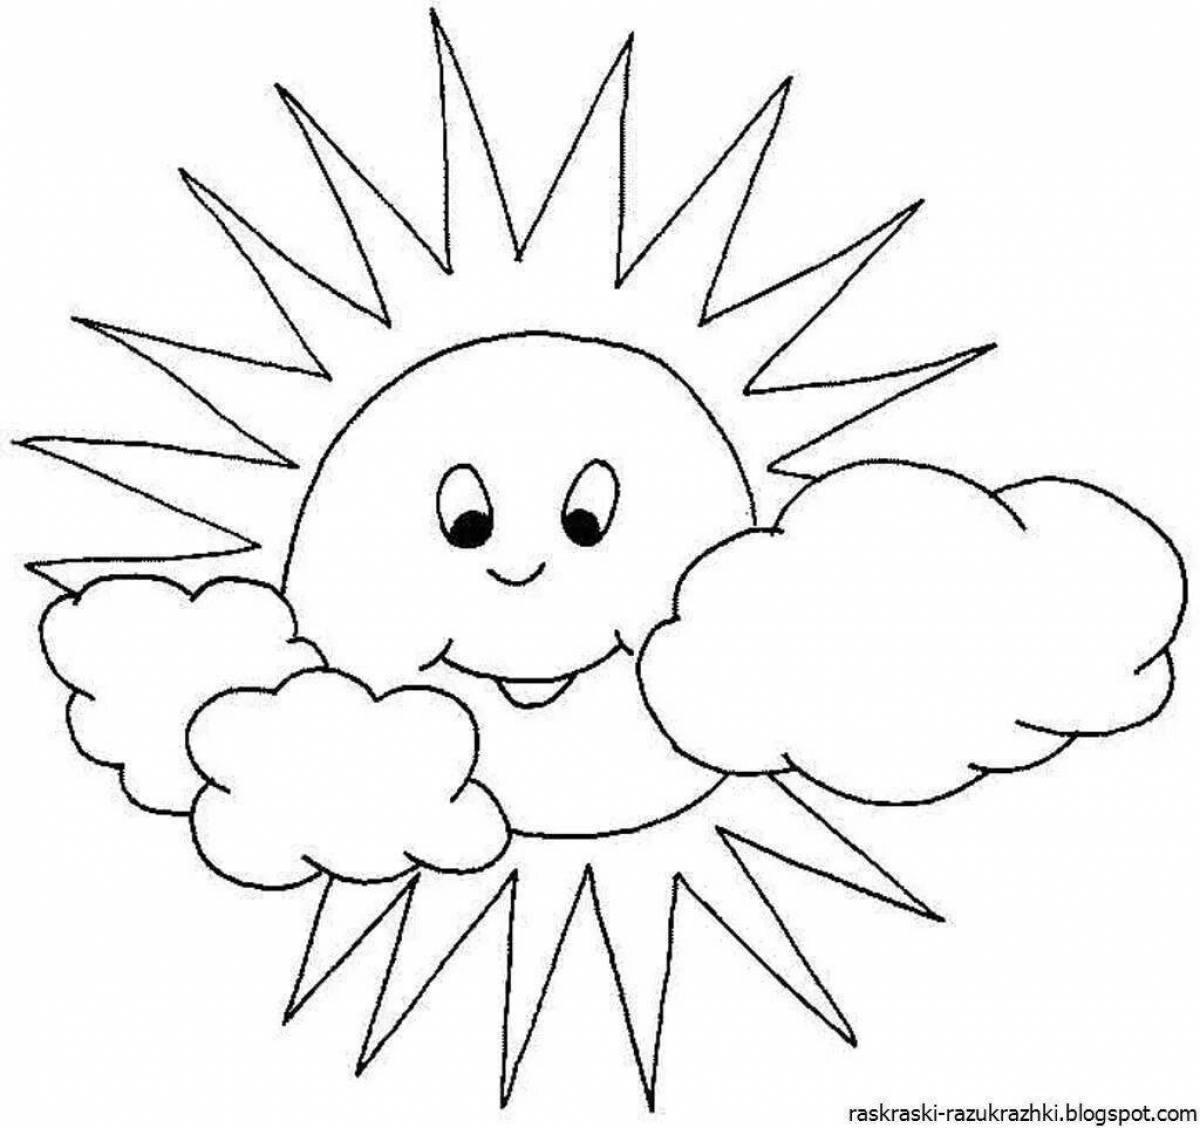 Fun coloring book sun for 4-5 year olds